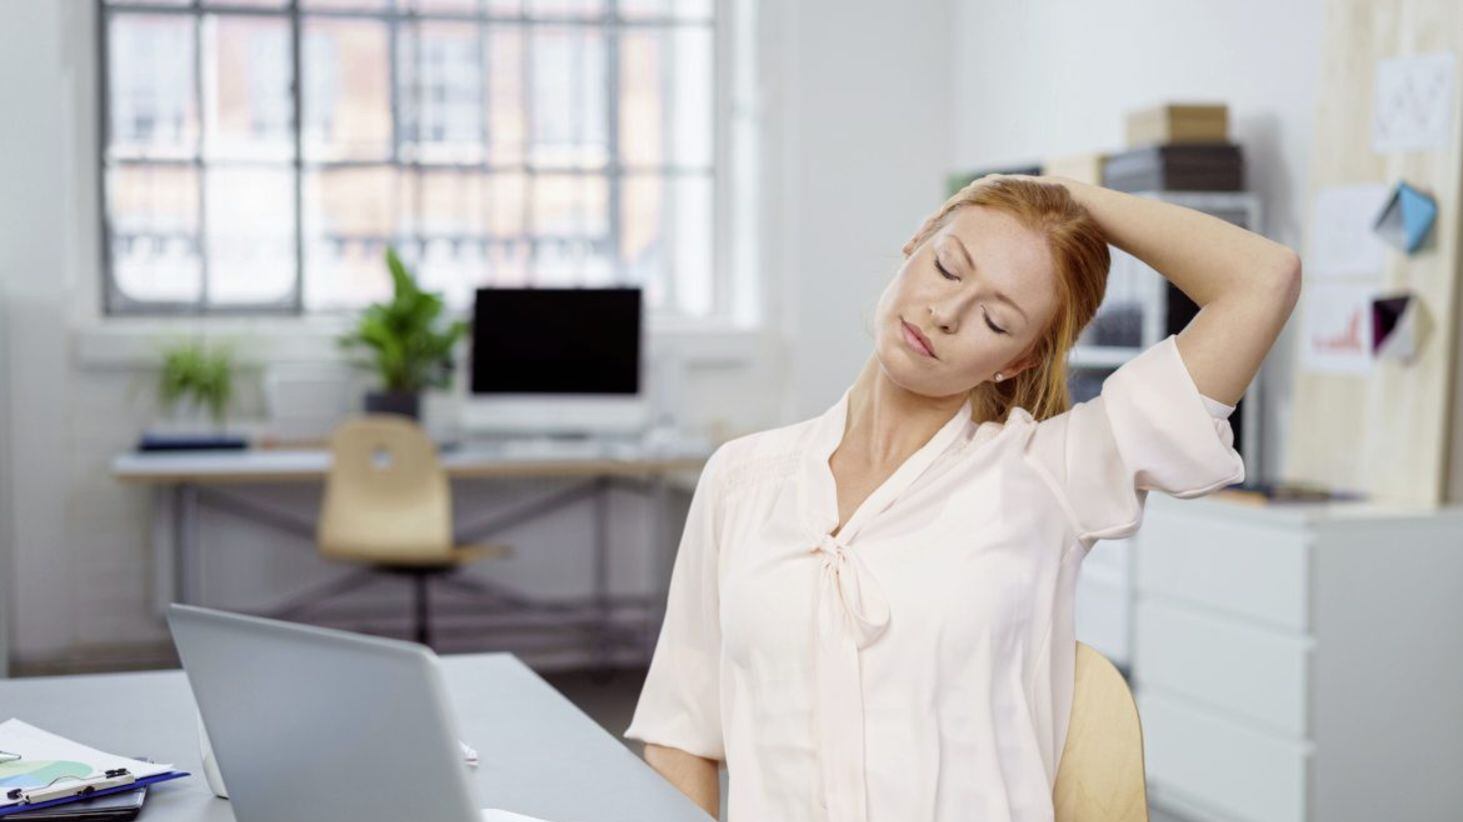 Moving your neck side to side and doing some gentle circles with your head can help to loosen up the area 